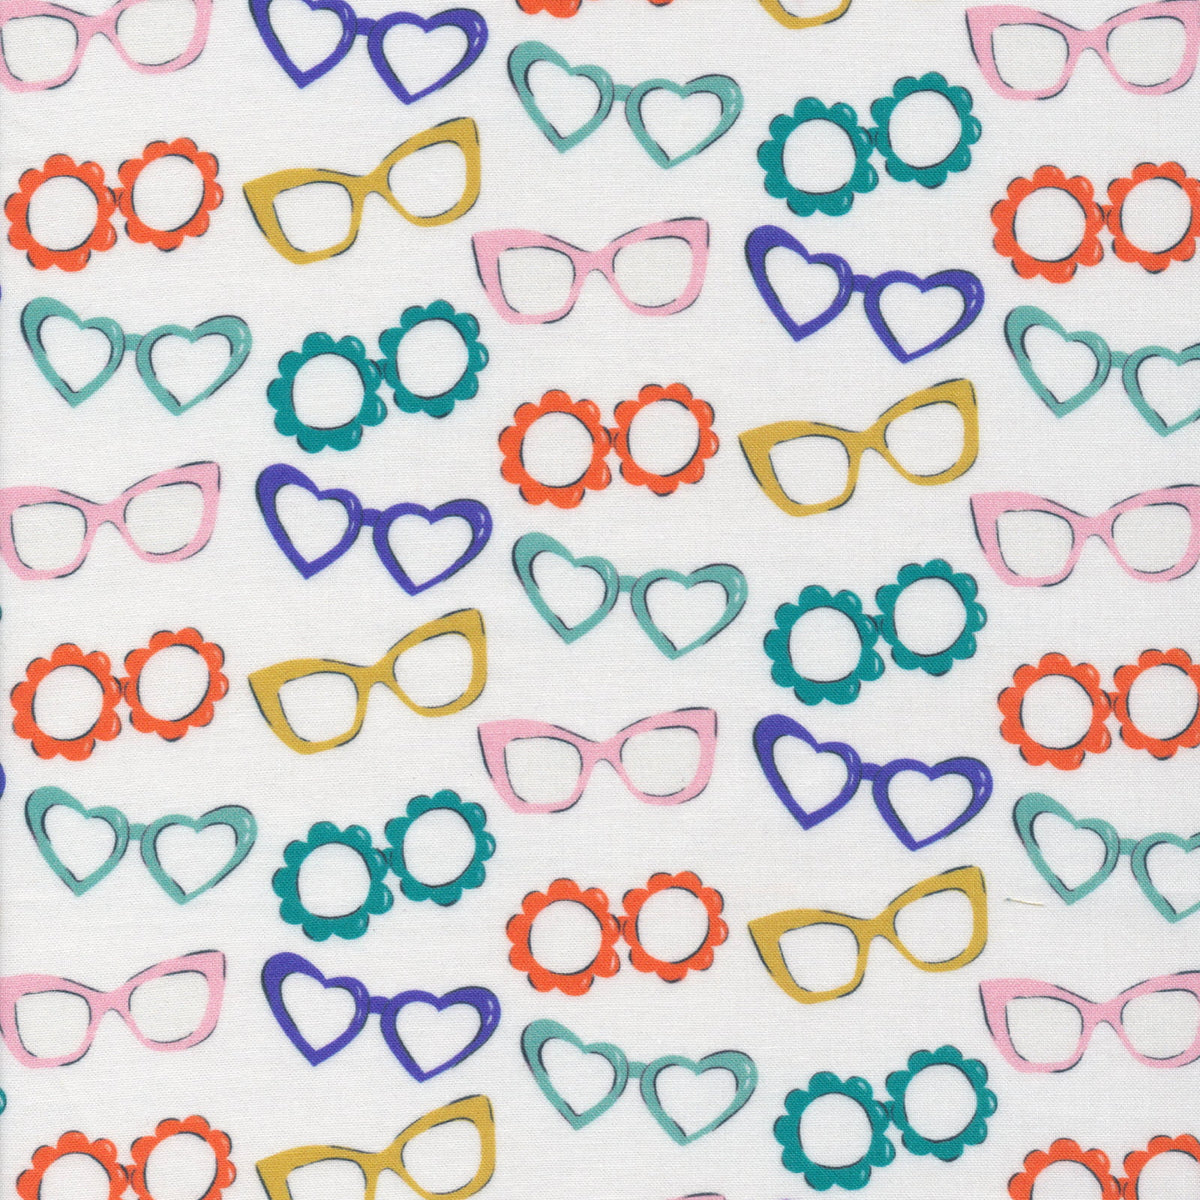 Dog Days of Summer Quilt Fabrics - Bright and Sunnies Sunglasses in White/Multi - 227416